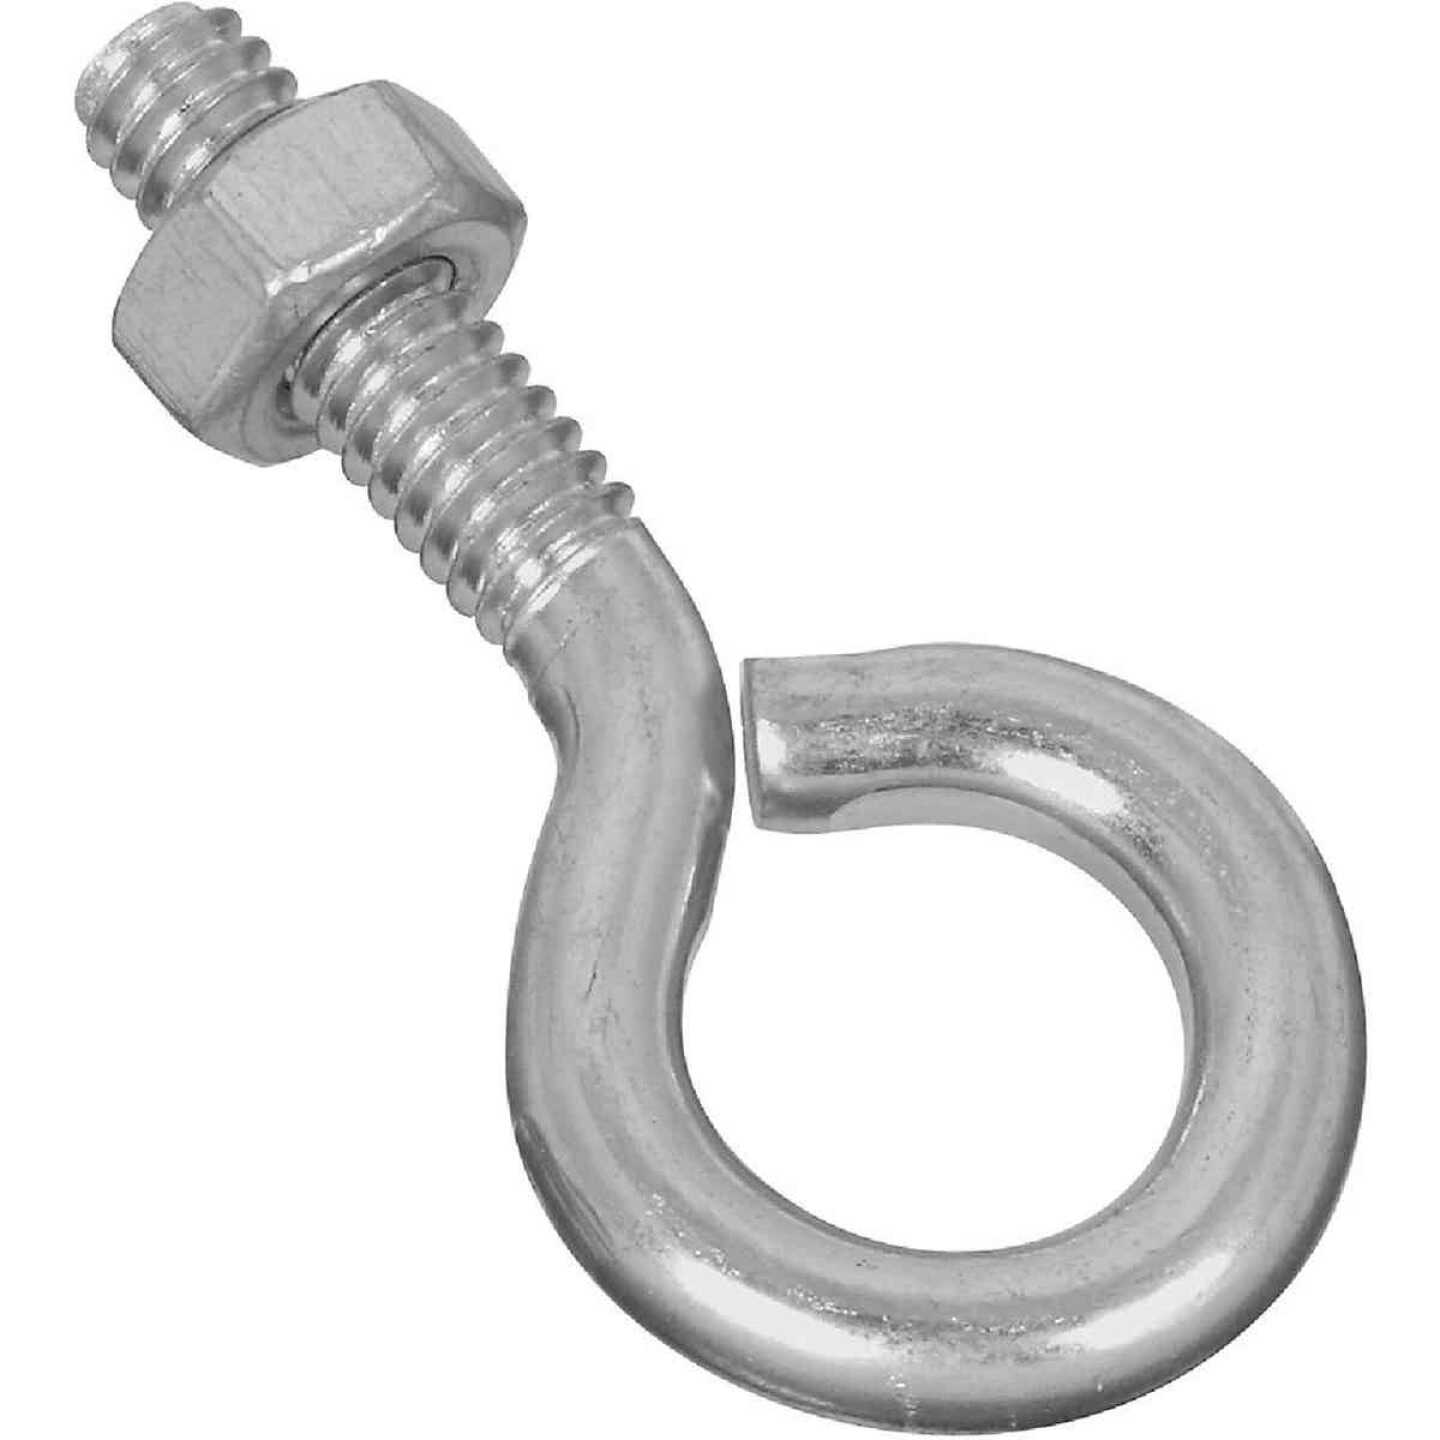 National 1/4 In. x 2 In. Zinc Eye Bolt with Hex Nut Image 1